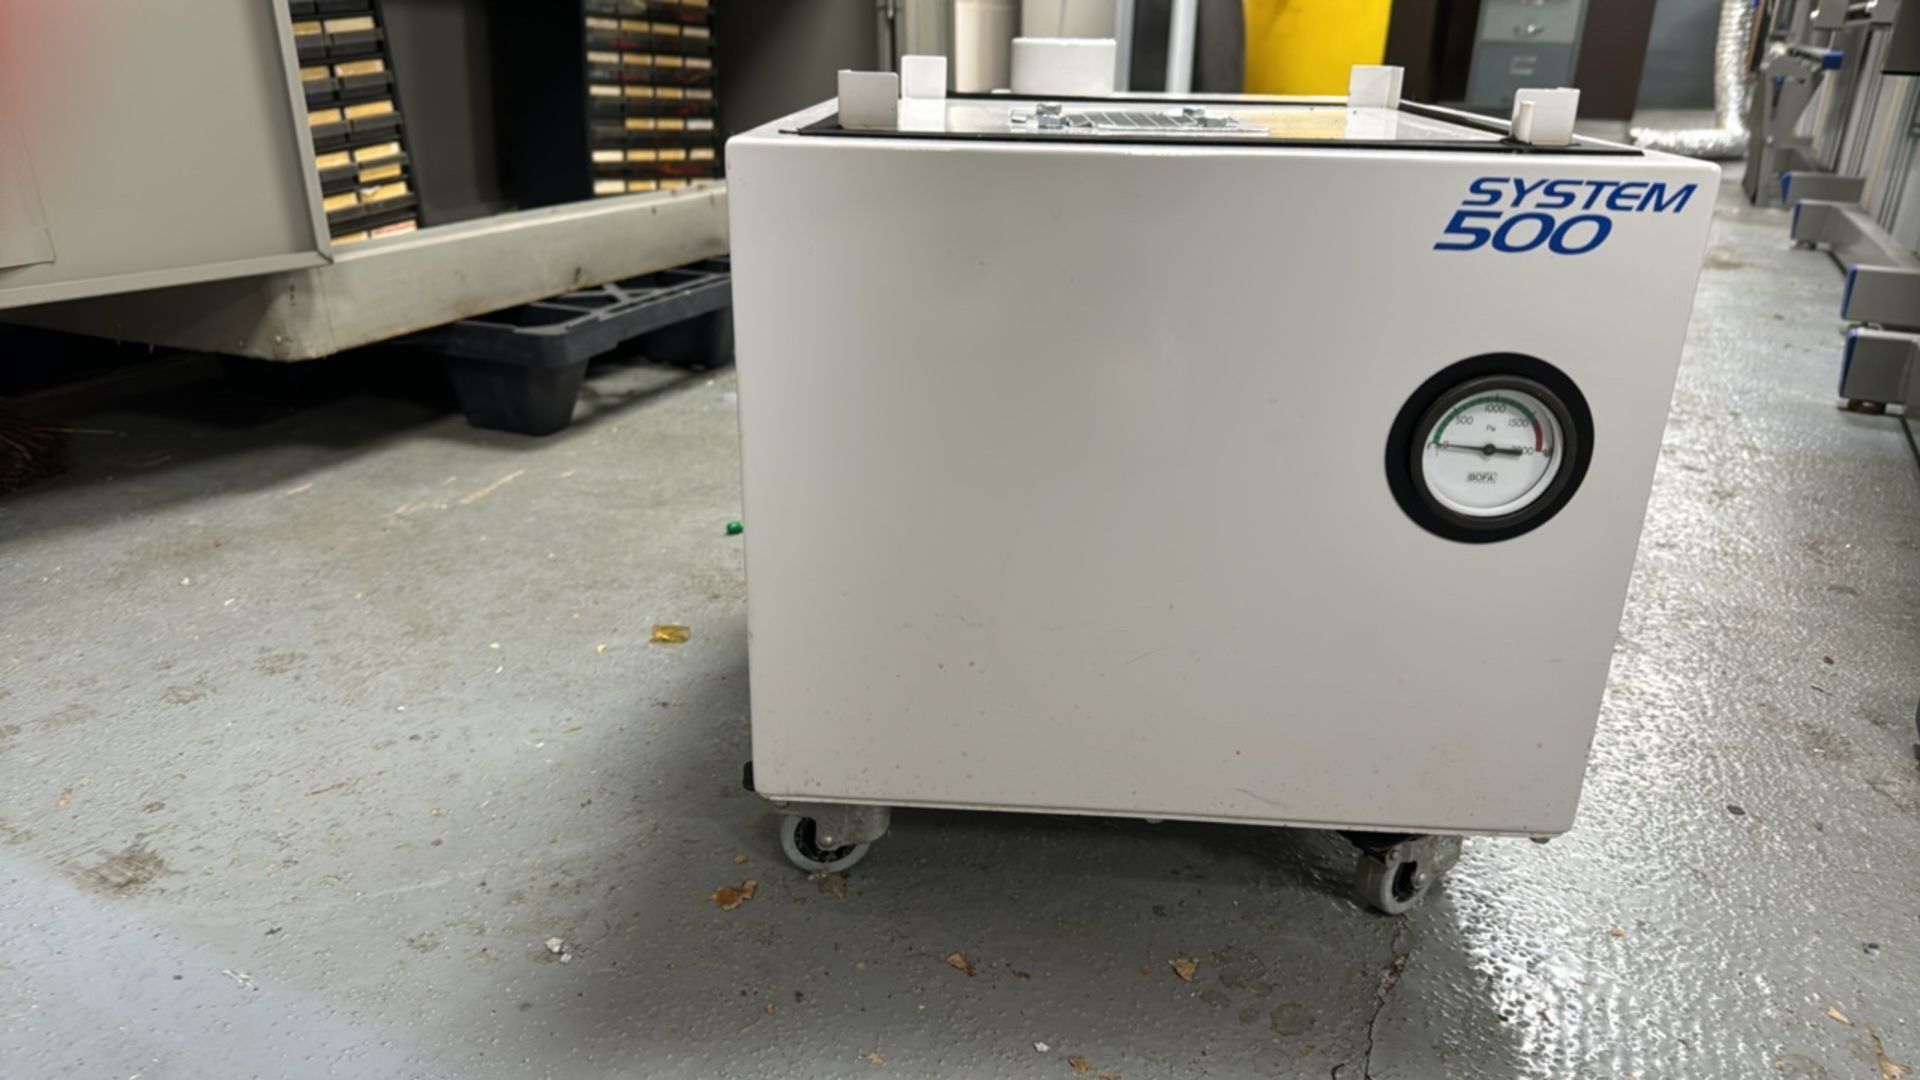 Bofa System 500 Fume Extractor - Image 3 of 4